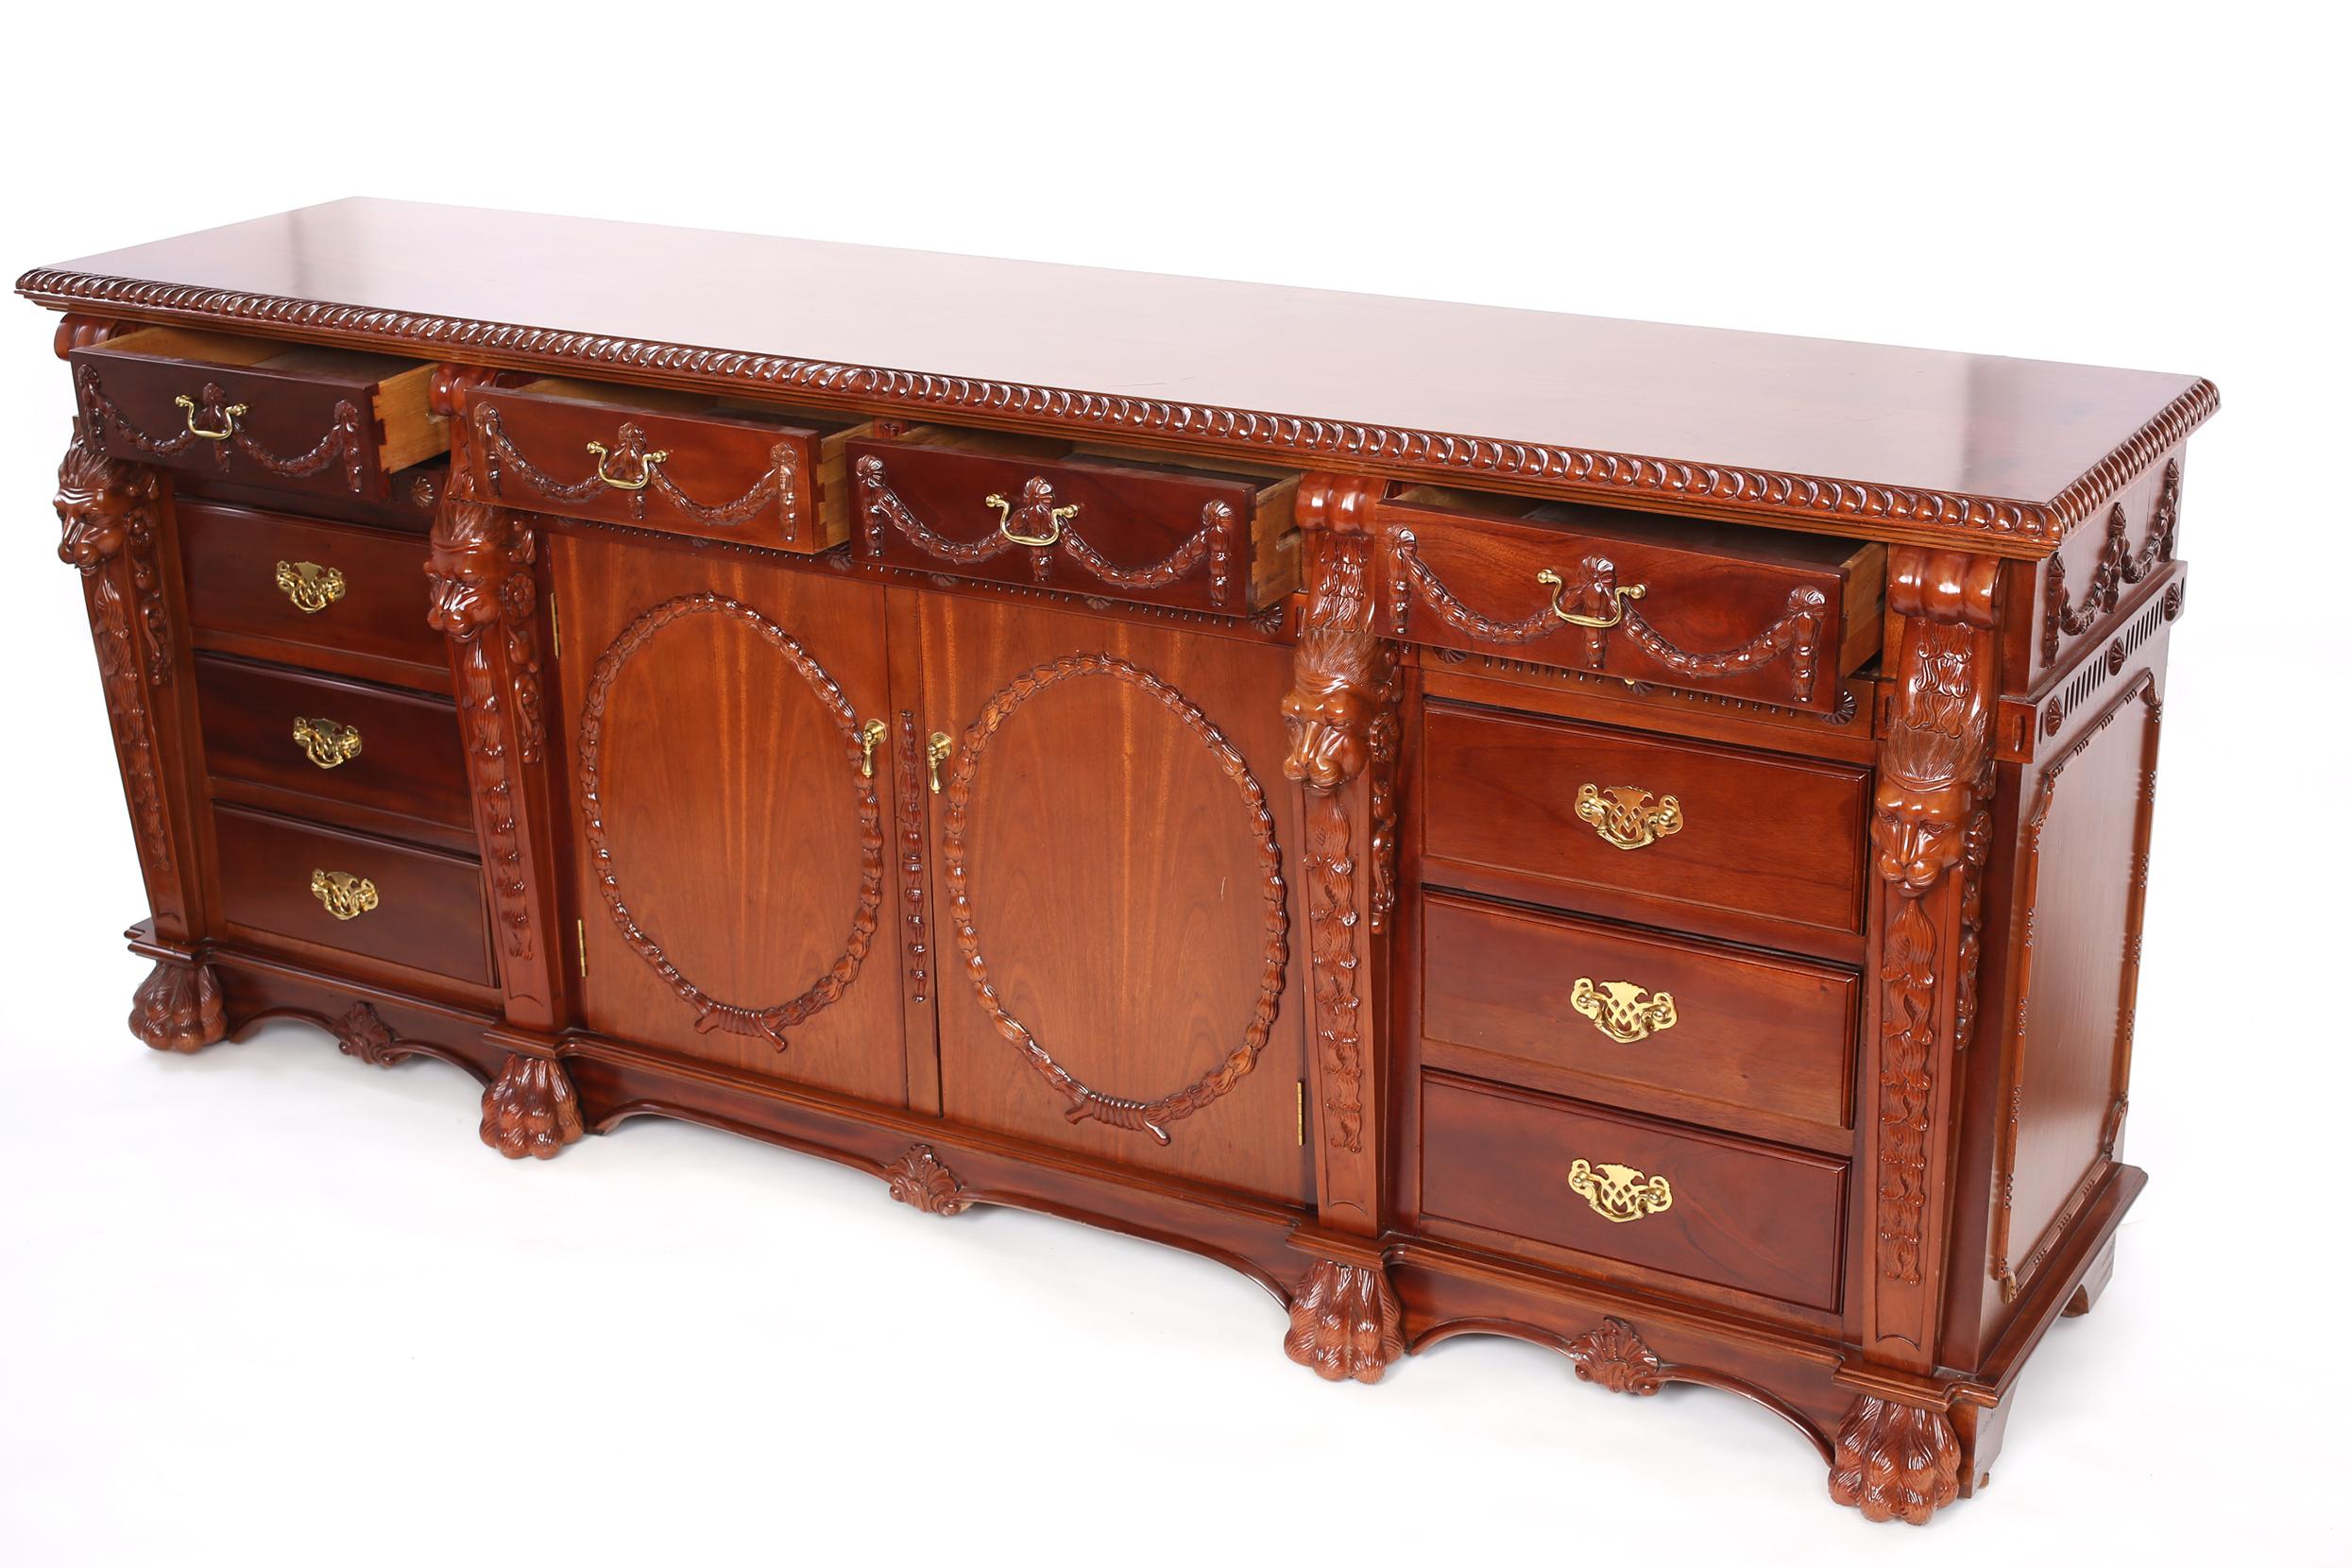 Early 20th century hand carved mahogany wood sideboard / server with lion head carvings, raised on claw feet & exterior design details. The sideboard / server is in good condition with age / use appropriate wear. The server stand about 35.5 inches